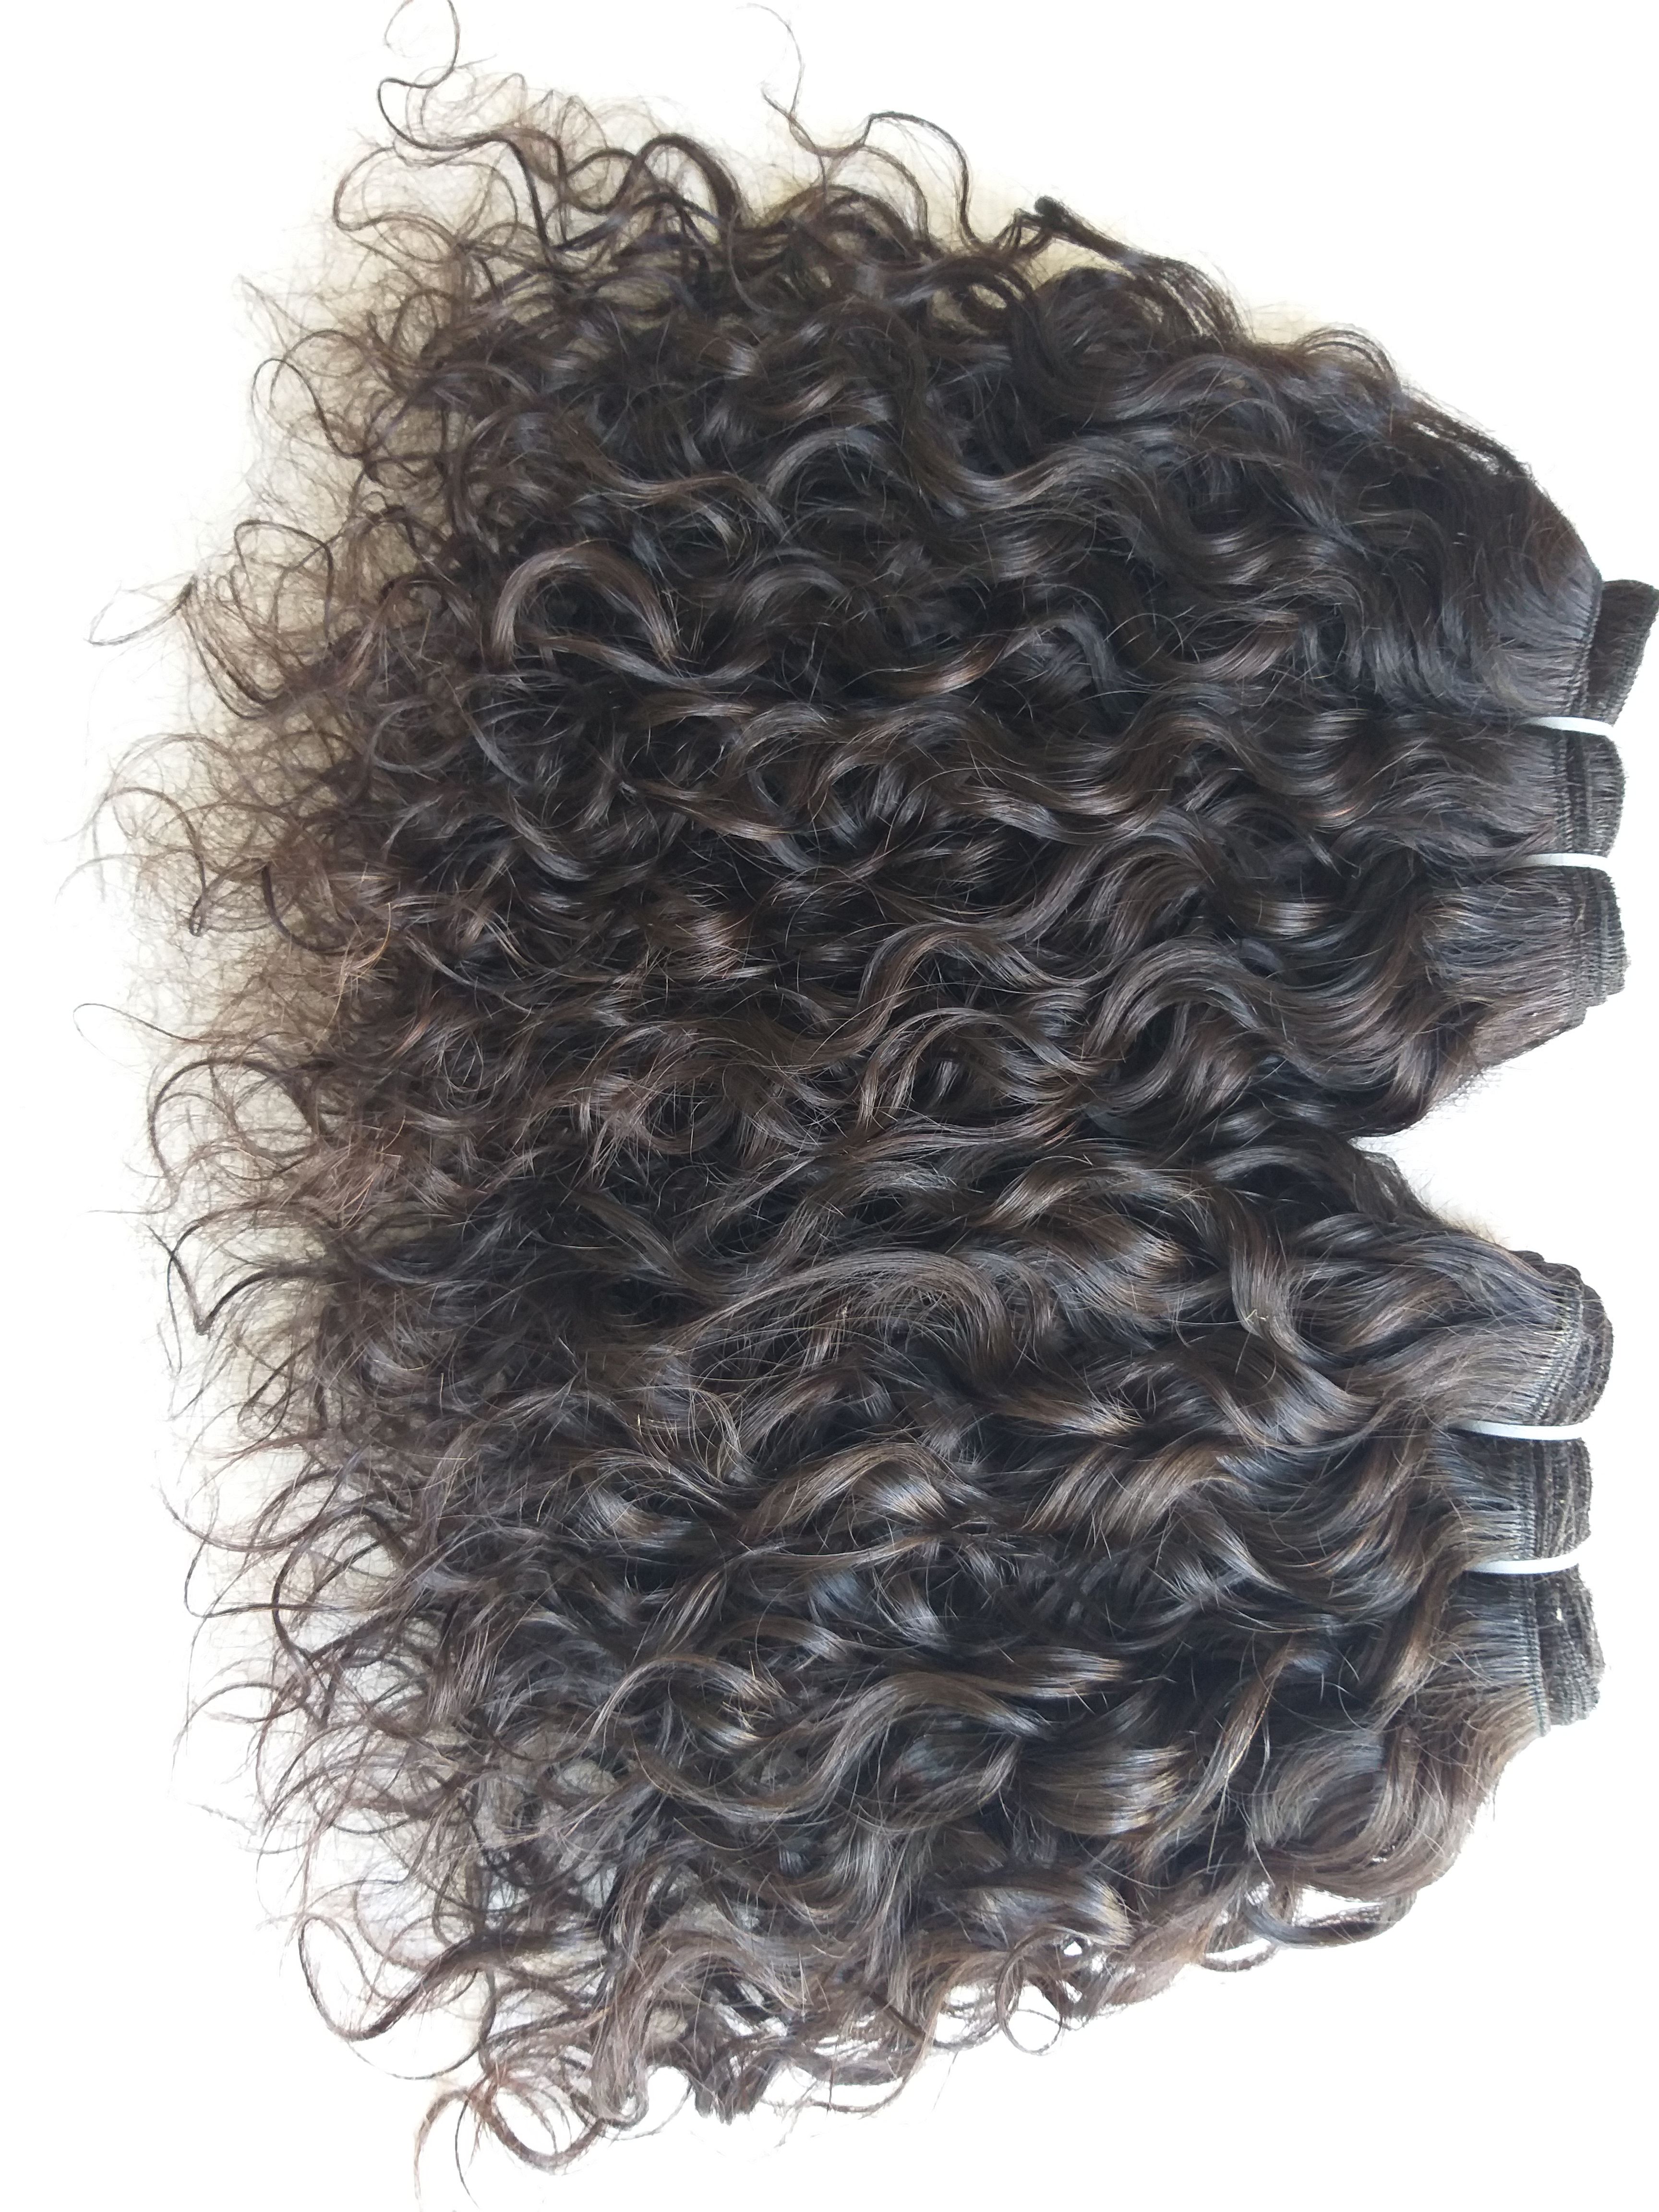 Raw Unprocessed Temple Donated Curly Hair